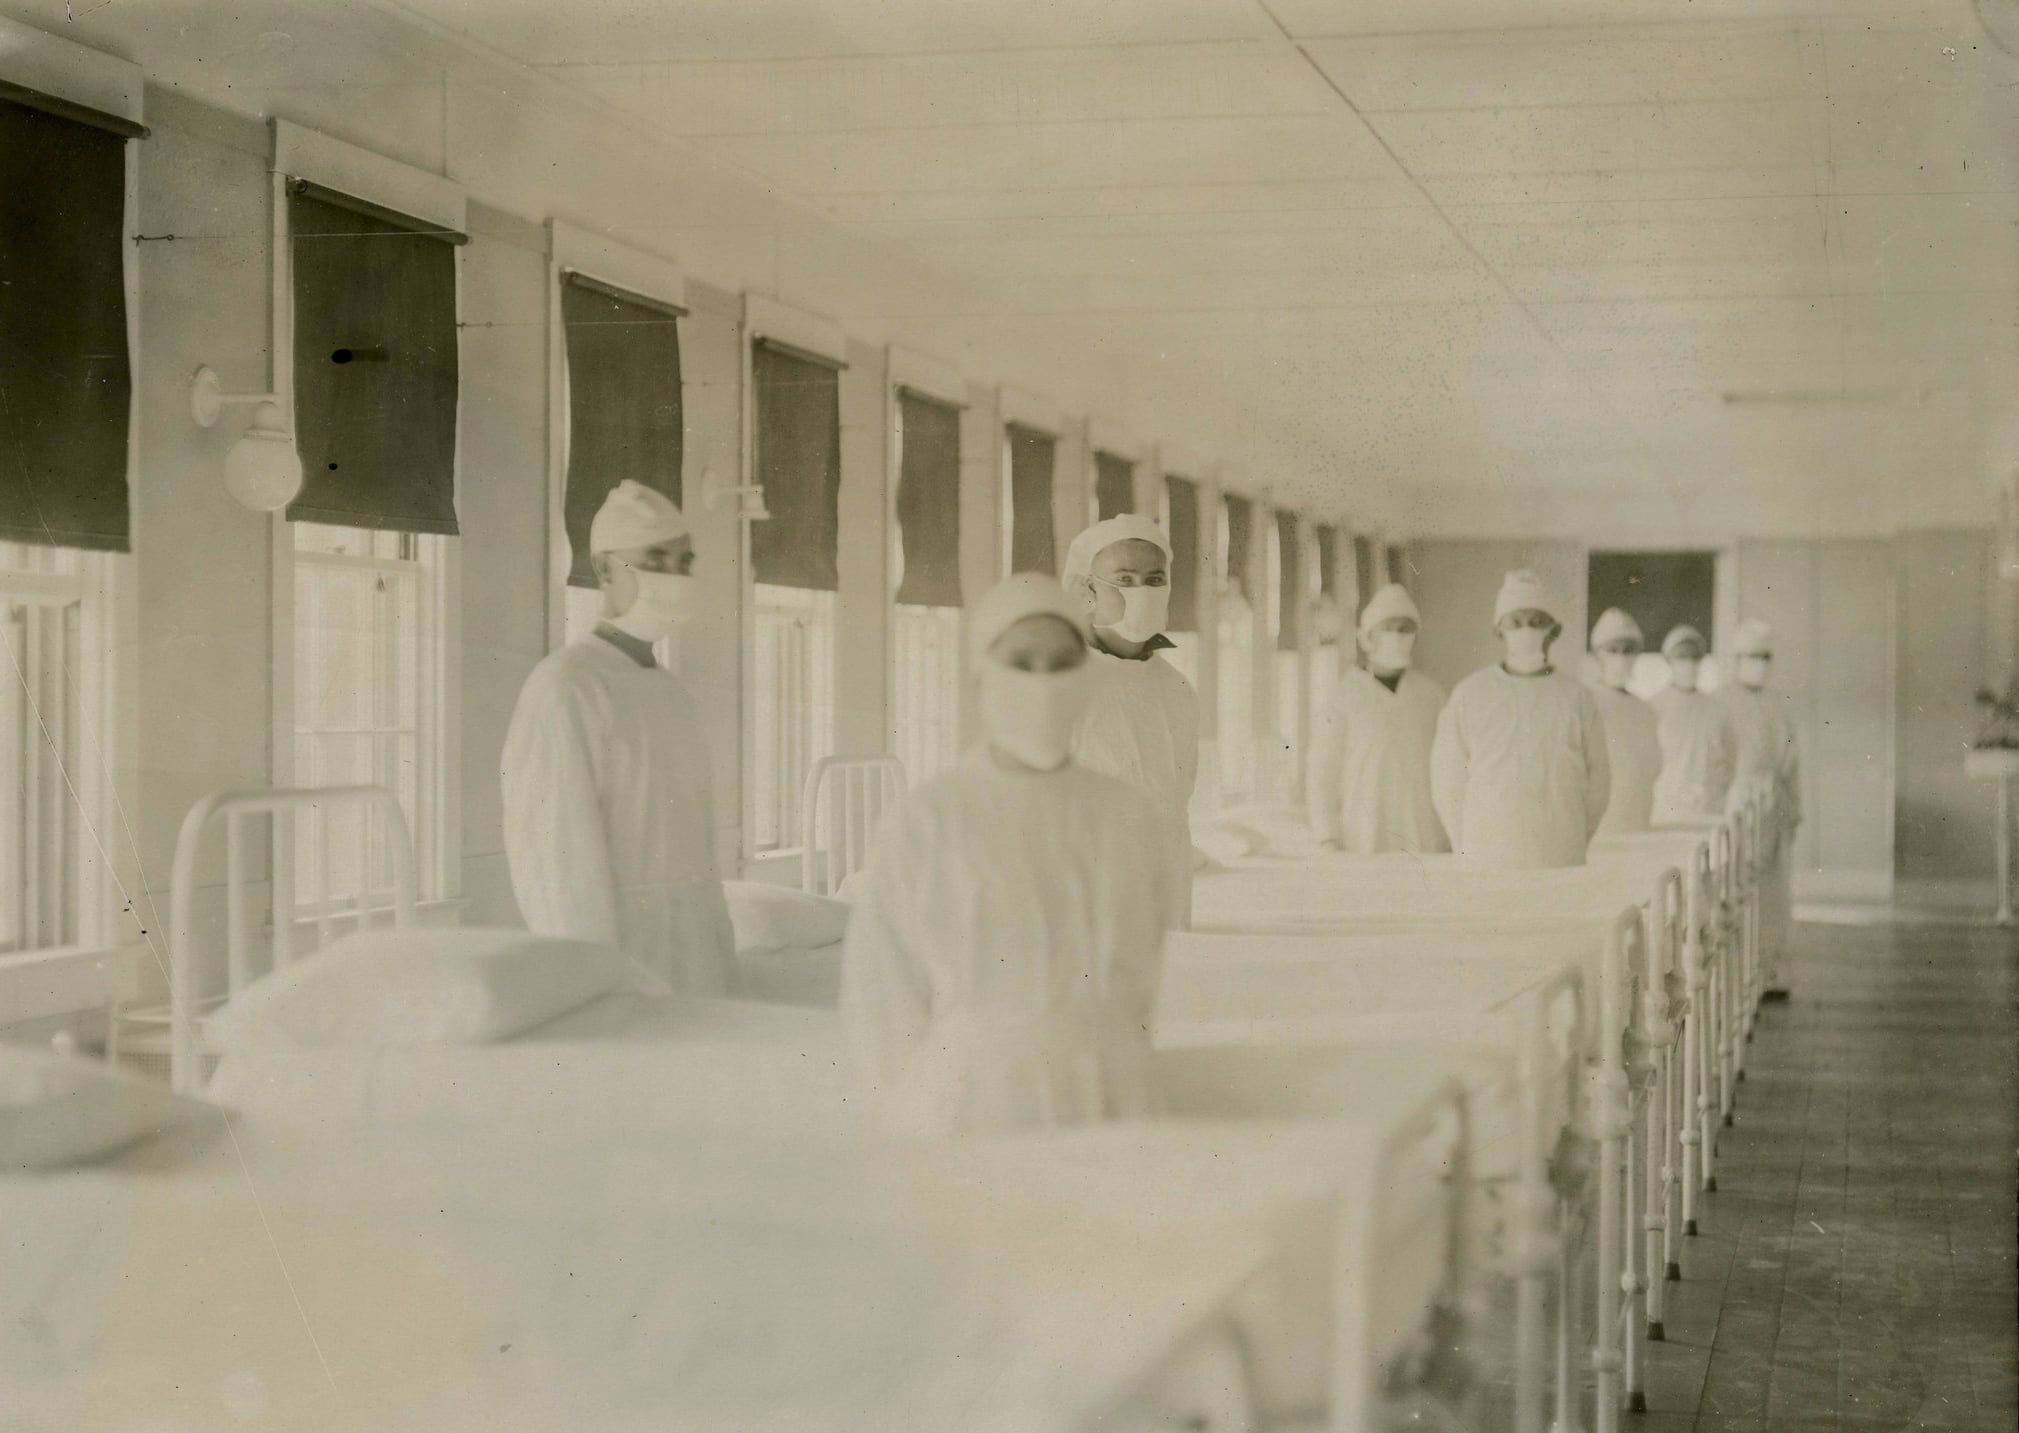 A picture taken during the 1919 flu pandemic.